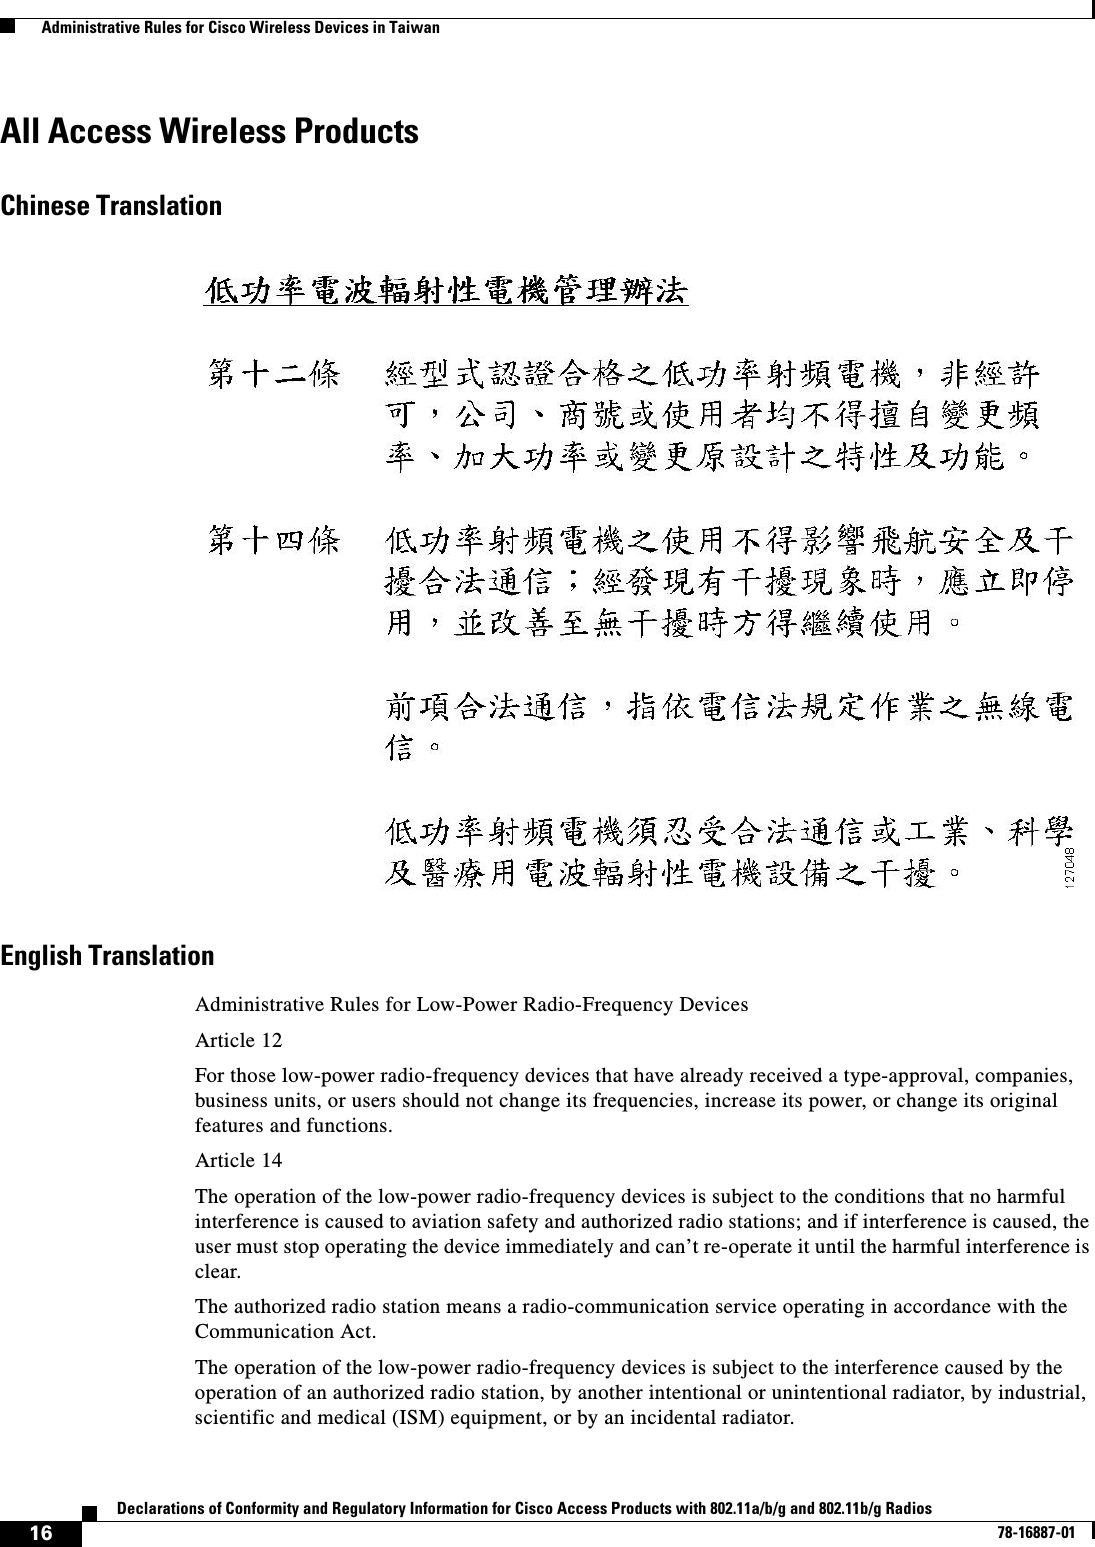  16Declarations of Conformity and Regulatory Information for Cisco Access Products with 802.11a/b/g and 802.11b/g Radios78-16887-01  Administrative Rules for Cisco Wireless Devices in TaiwanAll Access Wireless ProductsChinese TranslationEnglish TranslationAdministrative Rules for Low-Power Radio-Frequency DevicesArticle 12For those low-power radio-frequency devices that have already received a type-approval, companies, business units, or users should not change its frequencies, increase its power, or change its original features and functions.Article 14The operation of the low-power radio-frequency devices is subject to the conditions that no harmful interference is caused to aviation safety and authorized radio stations; and if interference is caused, the user must stop operating the device immediately and can’t re-operate it until the harmful interference is clear.The authorized radio station means a radio-communication service operating in accordance with the Communication Act. The operation of the low-power radio-frequency devices is subject to the interference caused by the operation of an authorized radio station, by another intentional or unintentional radiator, by industrial, scientific and medical (ISM) equipment, or by an incidental radiator. 